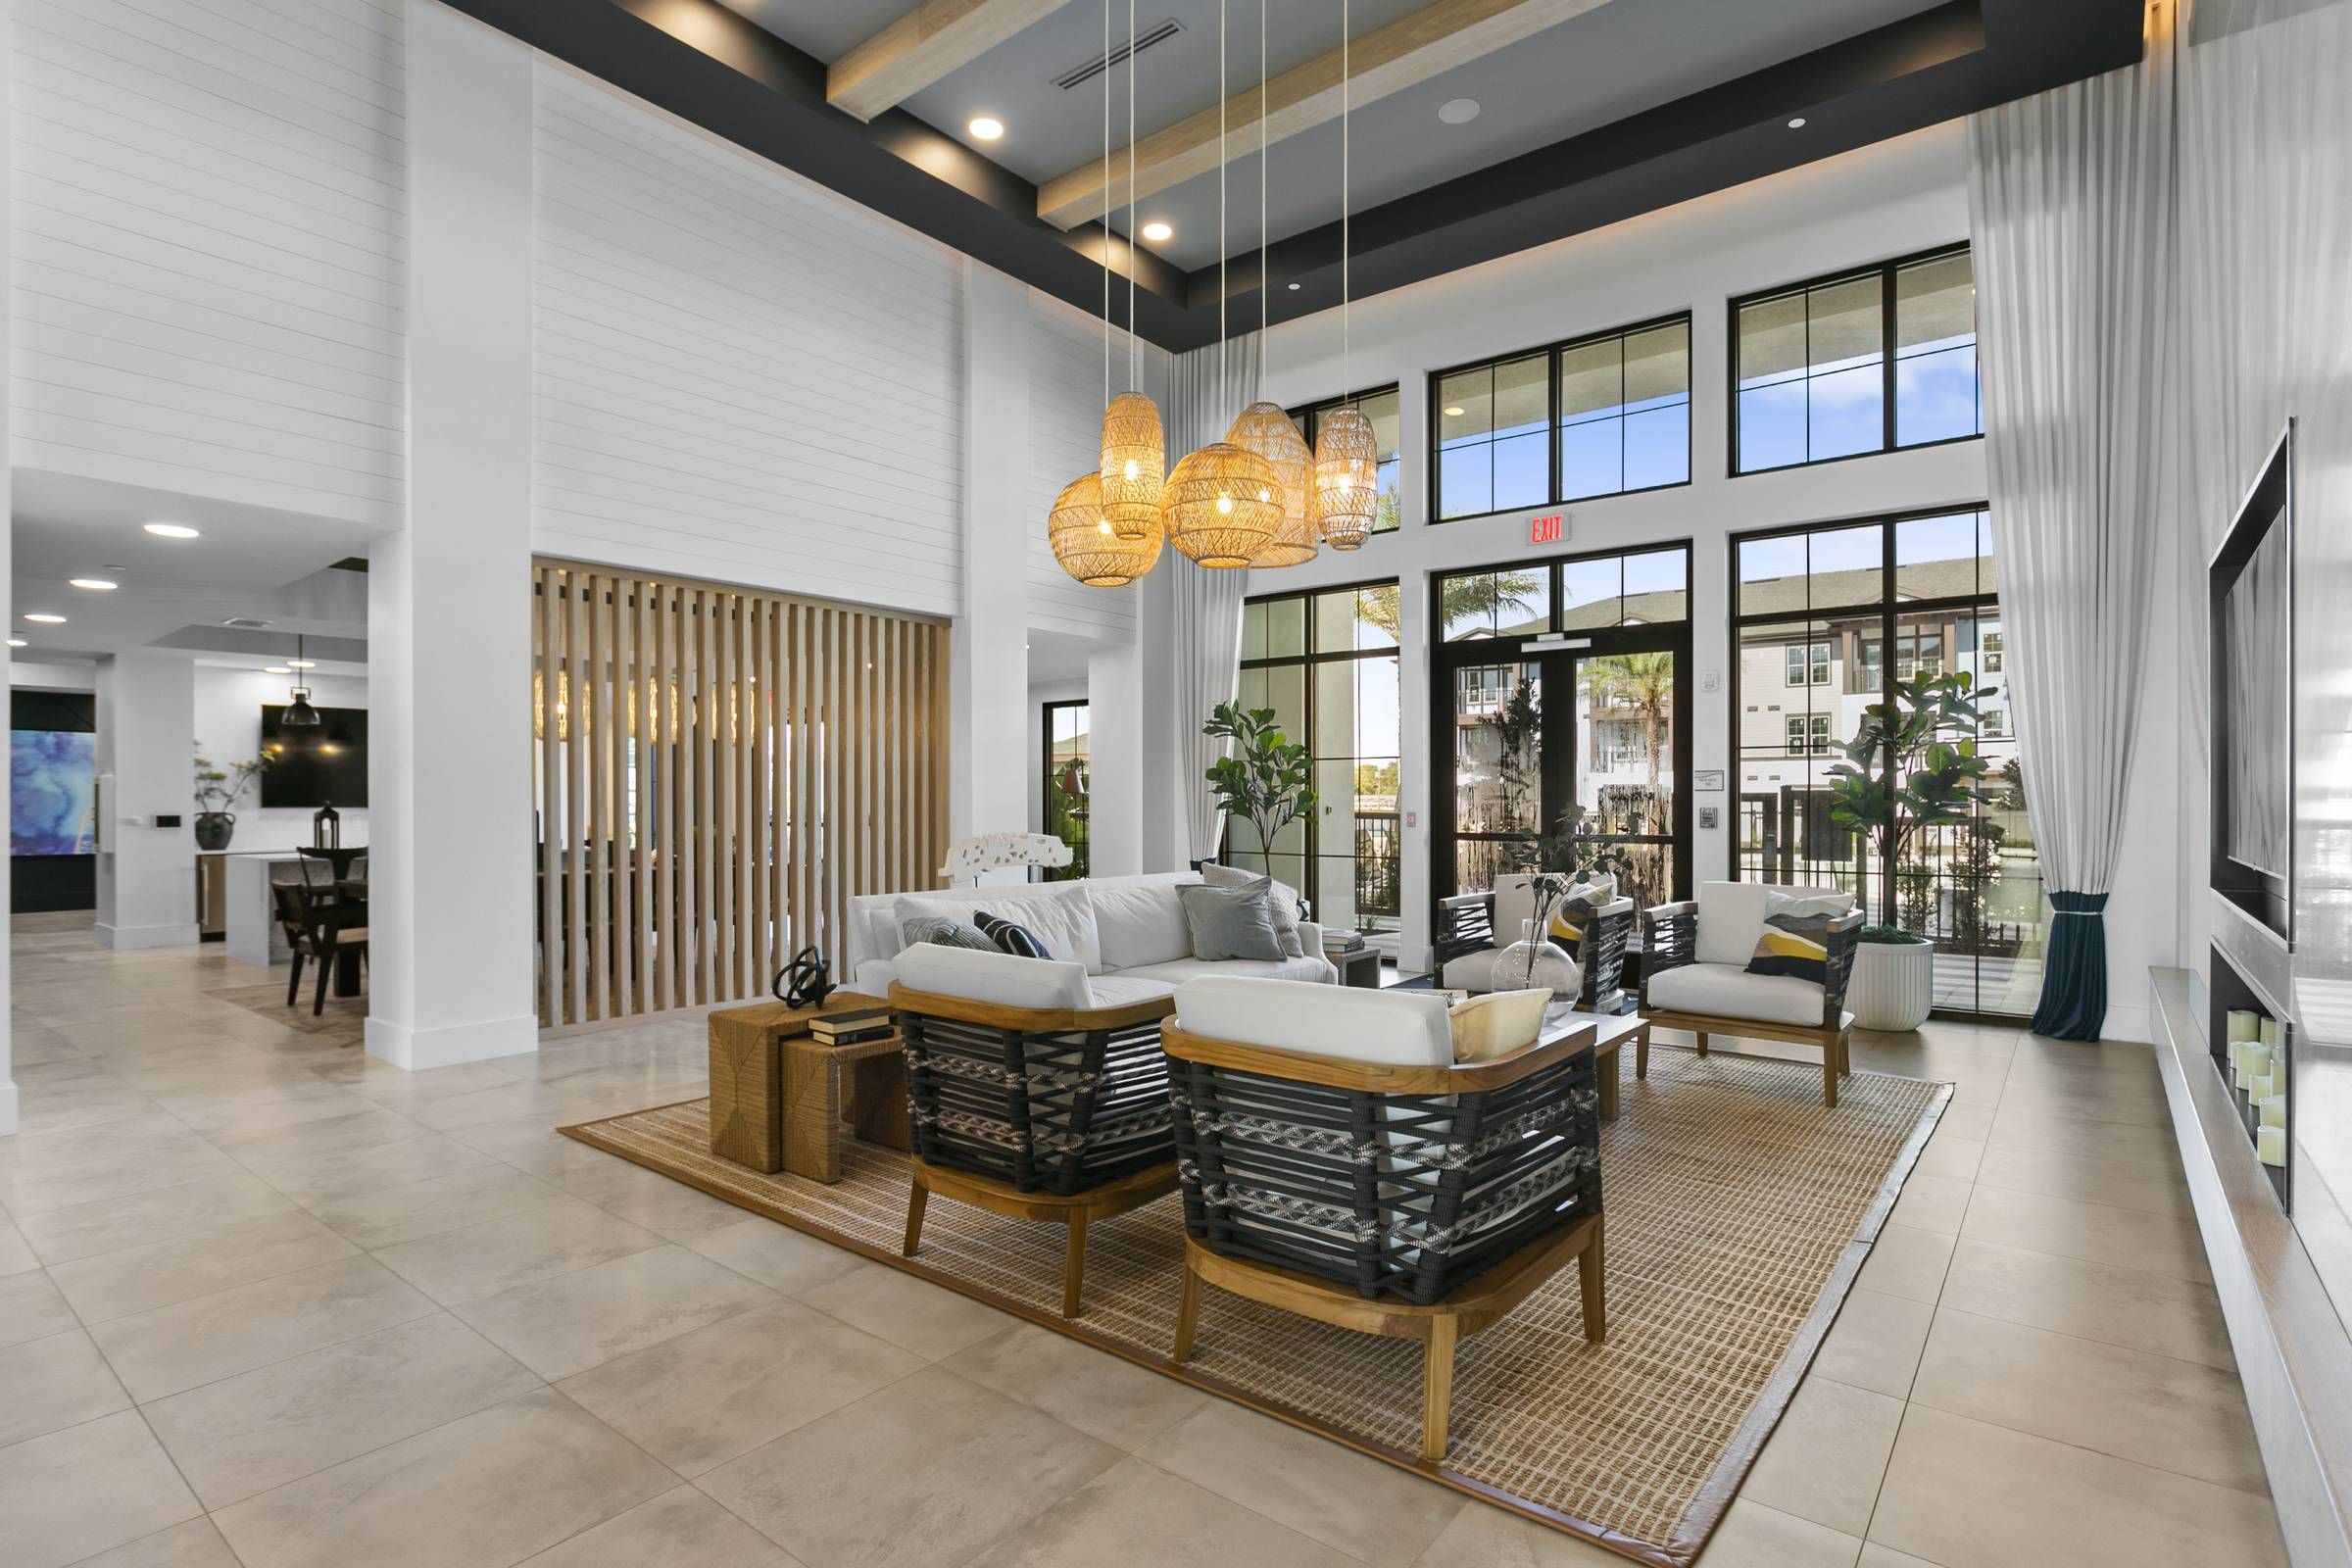 A grand entrance lobby at Alta Clearwater with high ceilings, elegant seating, and a wall of windows.